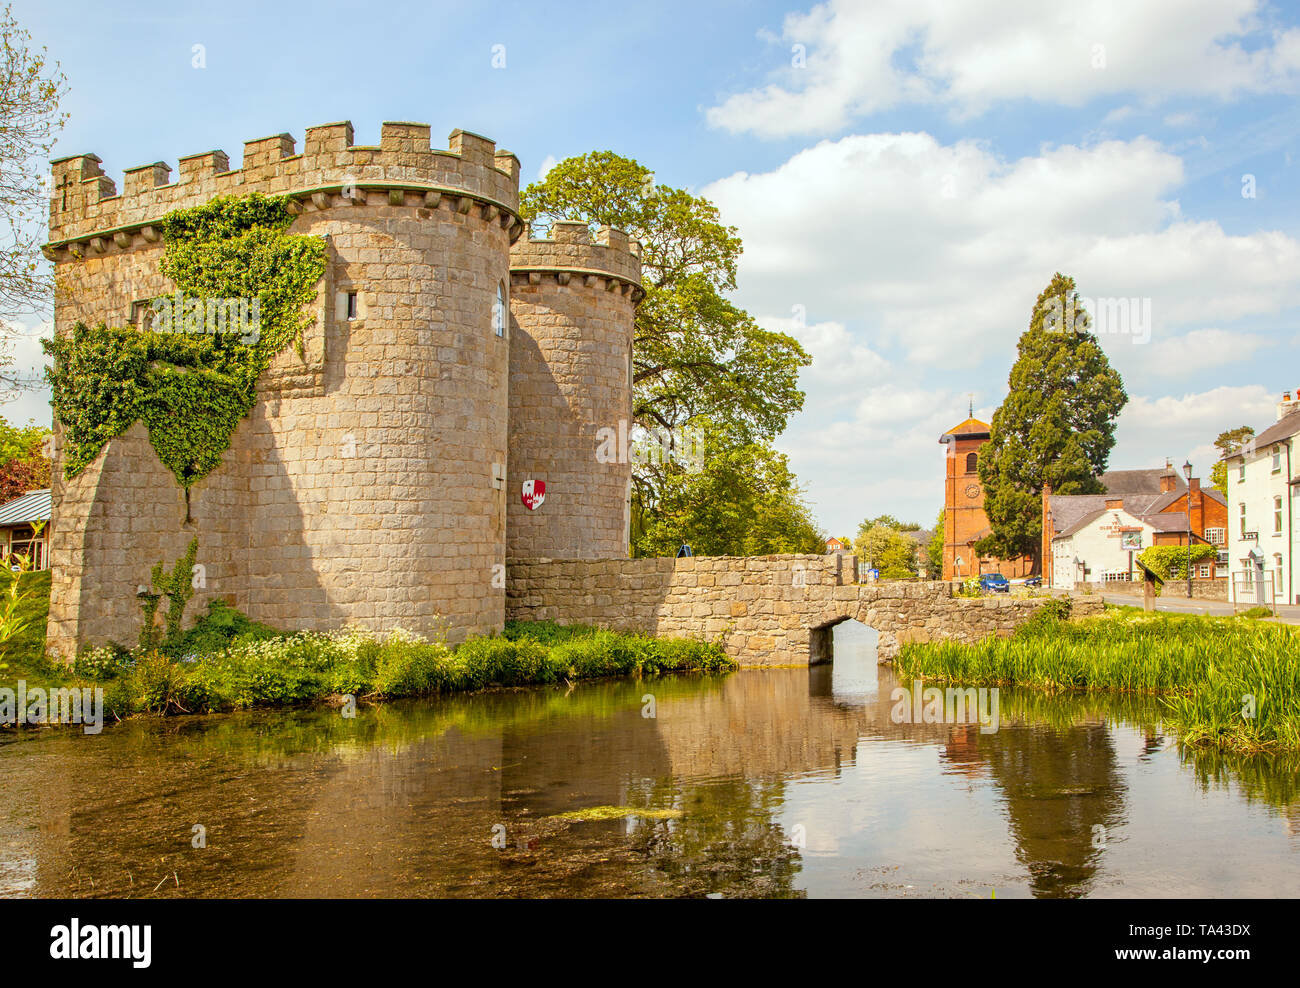 Whittington Castle, owned by the Whittington castle Preservation Fund is a motte-and-bailey castle  near Oswestry in North Shropshire England UK Stock Photo